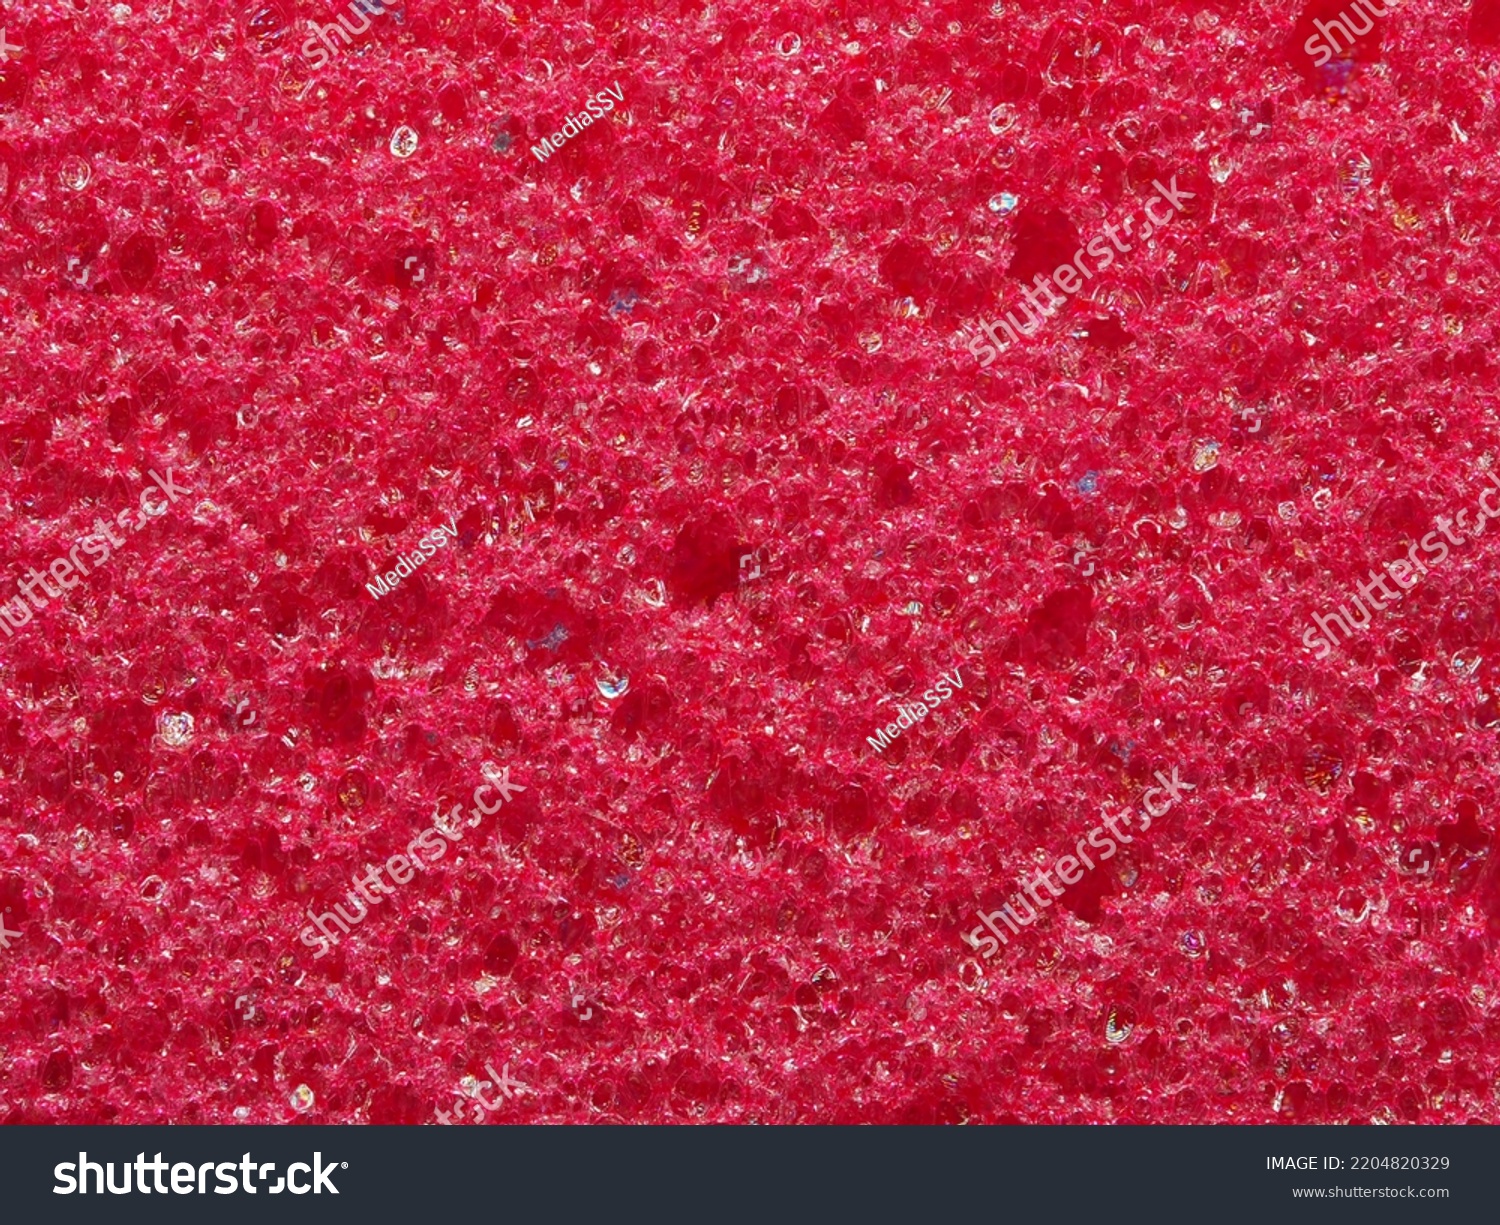 close-up, background, texture, large horizontal banner. heterogeneous surface fine pore structure bright saturated red pumice stone for finger care. full depth of field. high resolution photo #2204820329